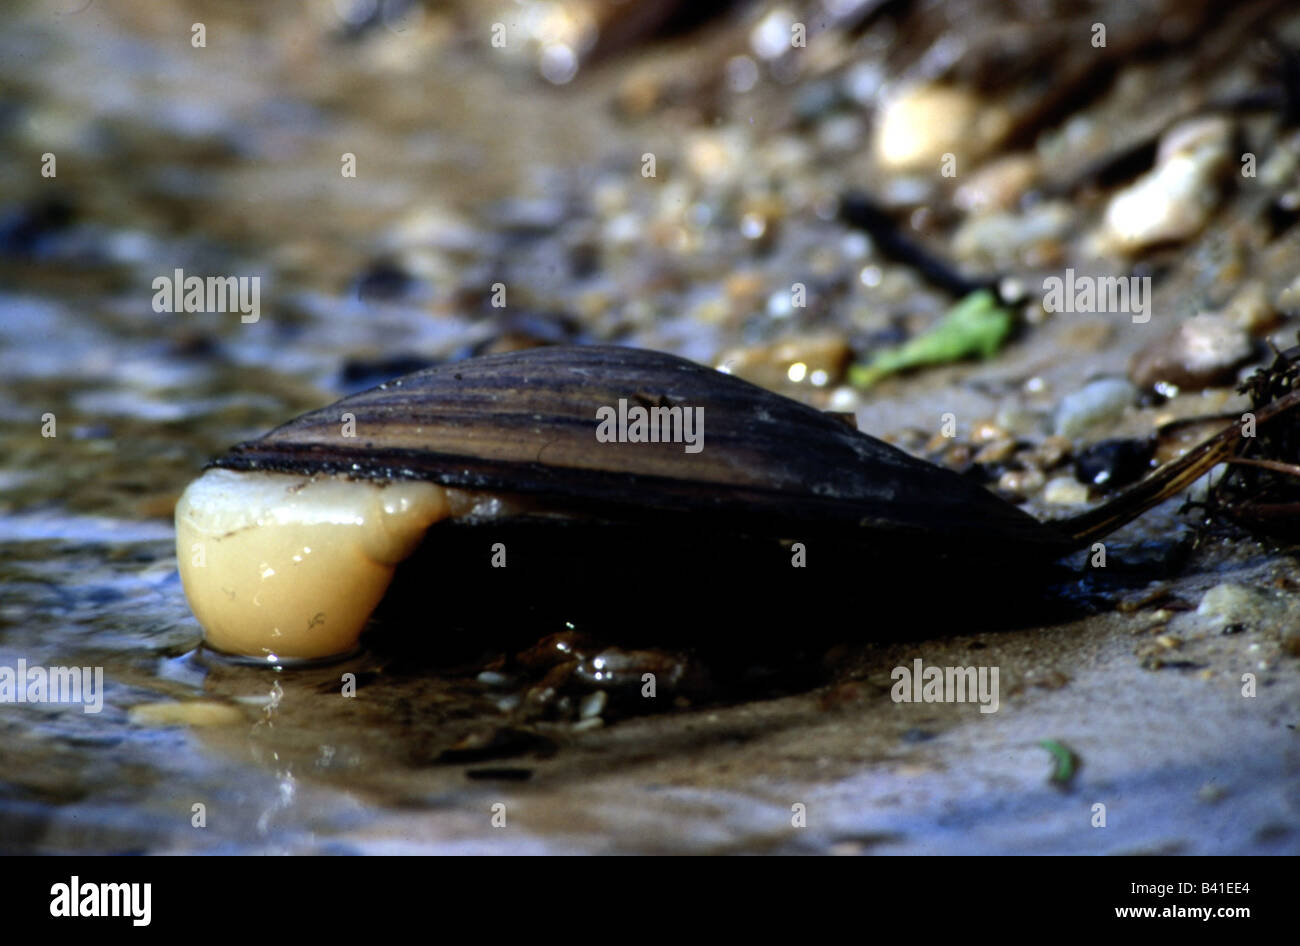 zoology / animals, cnidaria, Swan mussel, (Anodonta cygnea), open mussel, distribution: North- and Central Europe, Balkans, anim Stock Photo